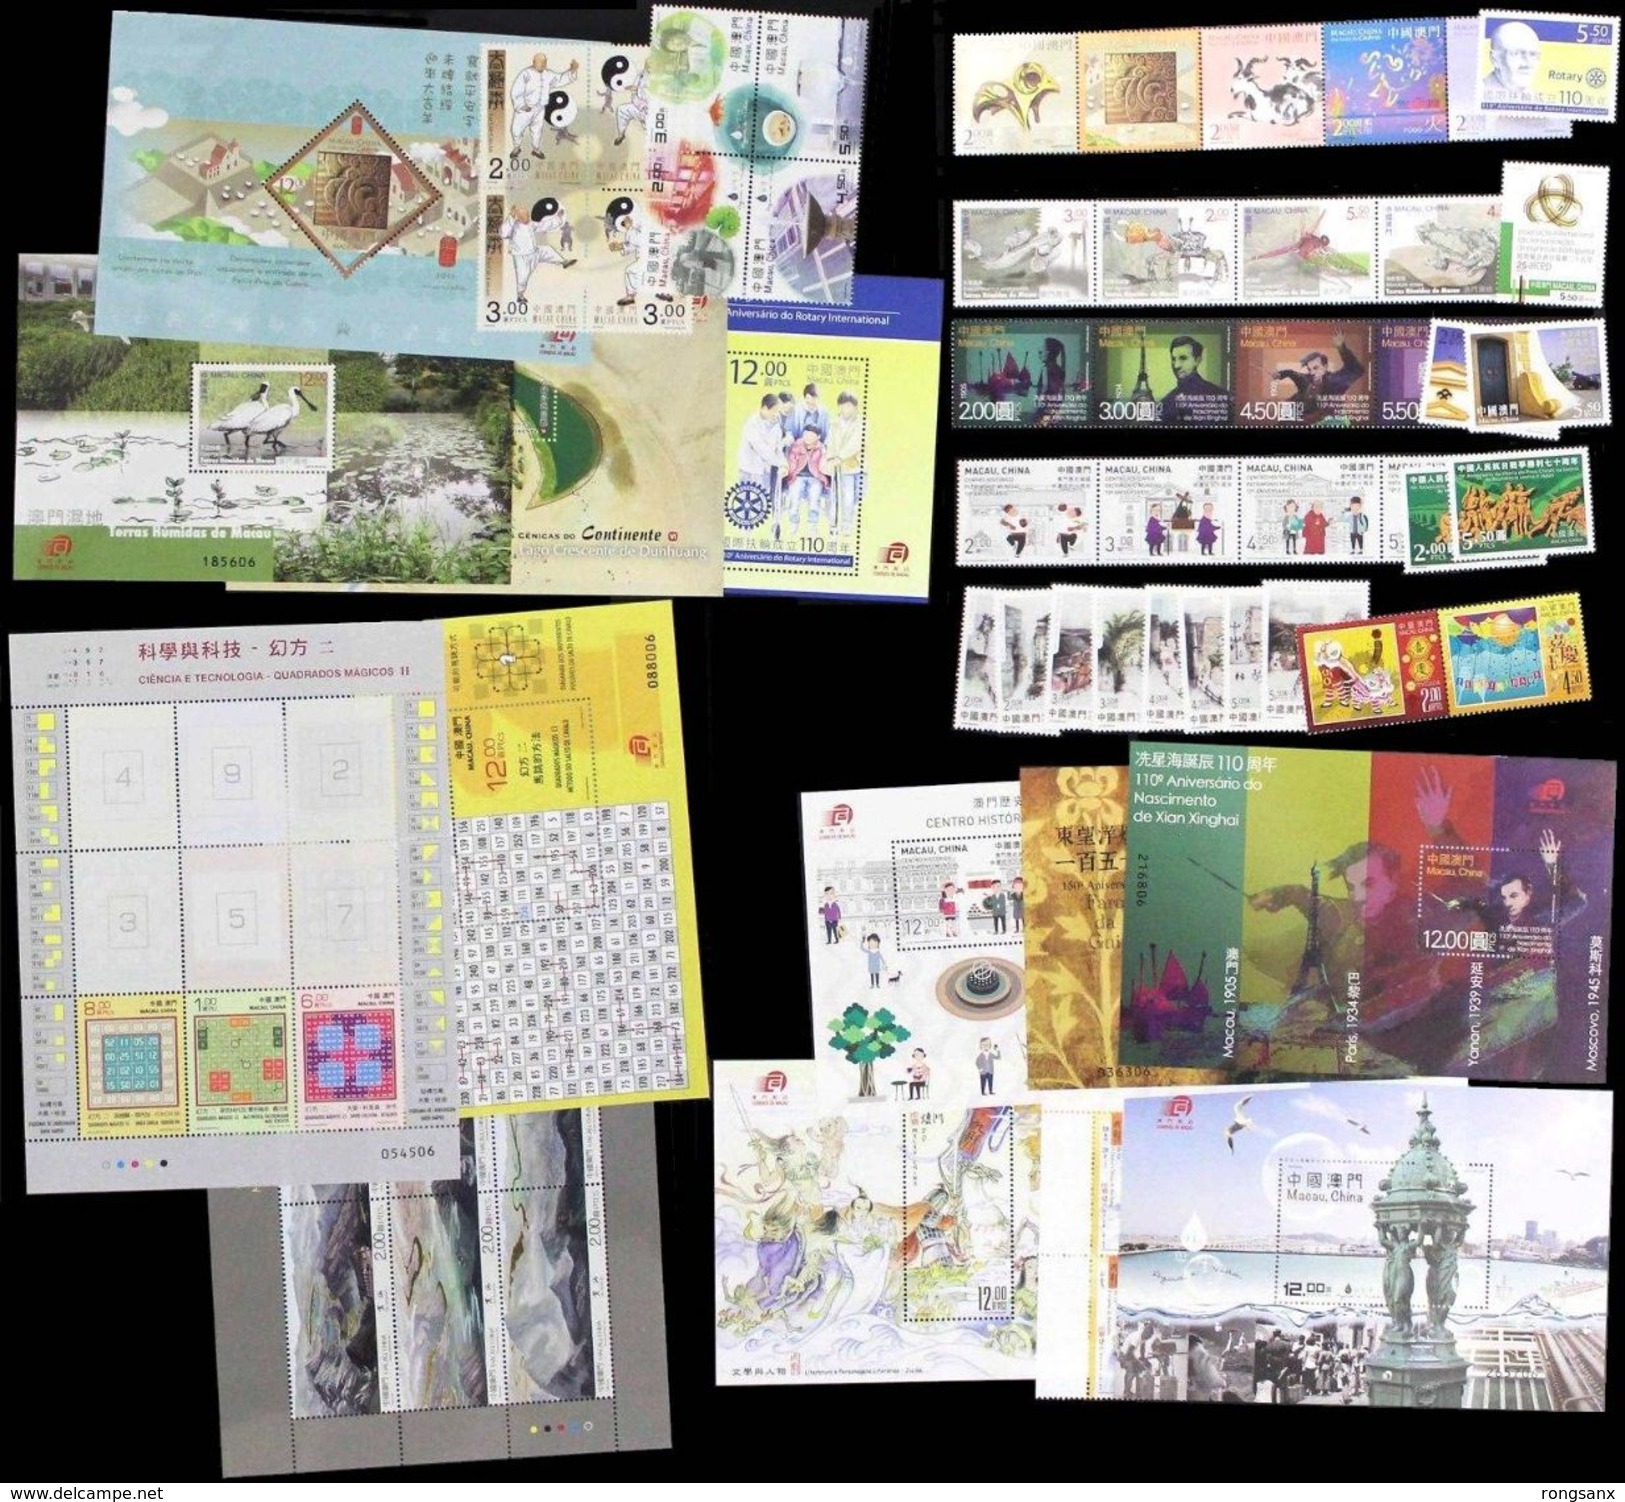 2015 MACAO MACAU YEAR PACK INCLUDE MS AND STAMP SEE PIC - Komplette Jahrgänge